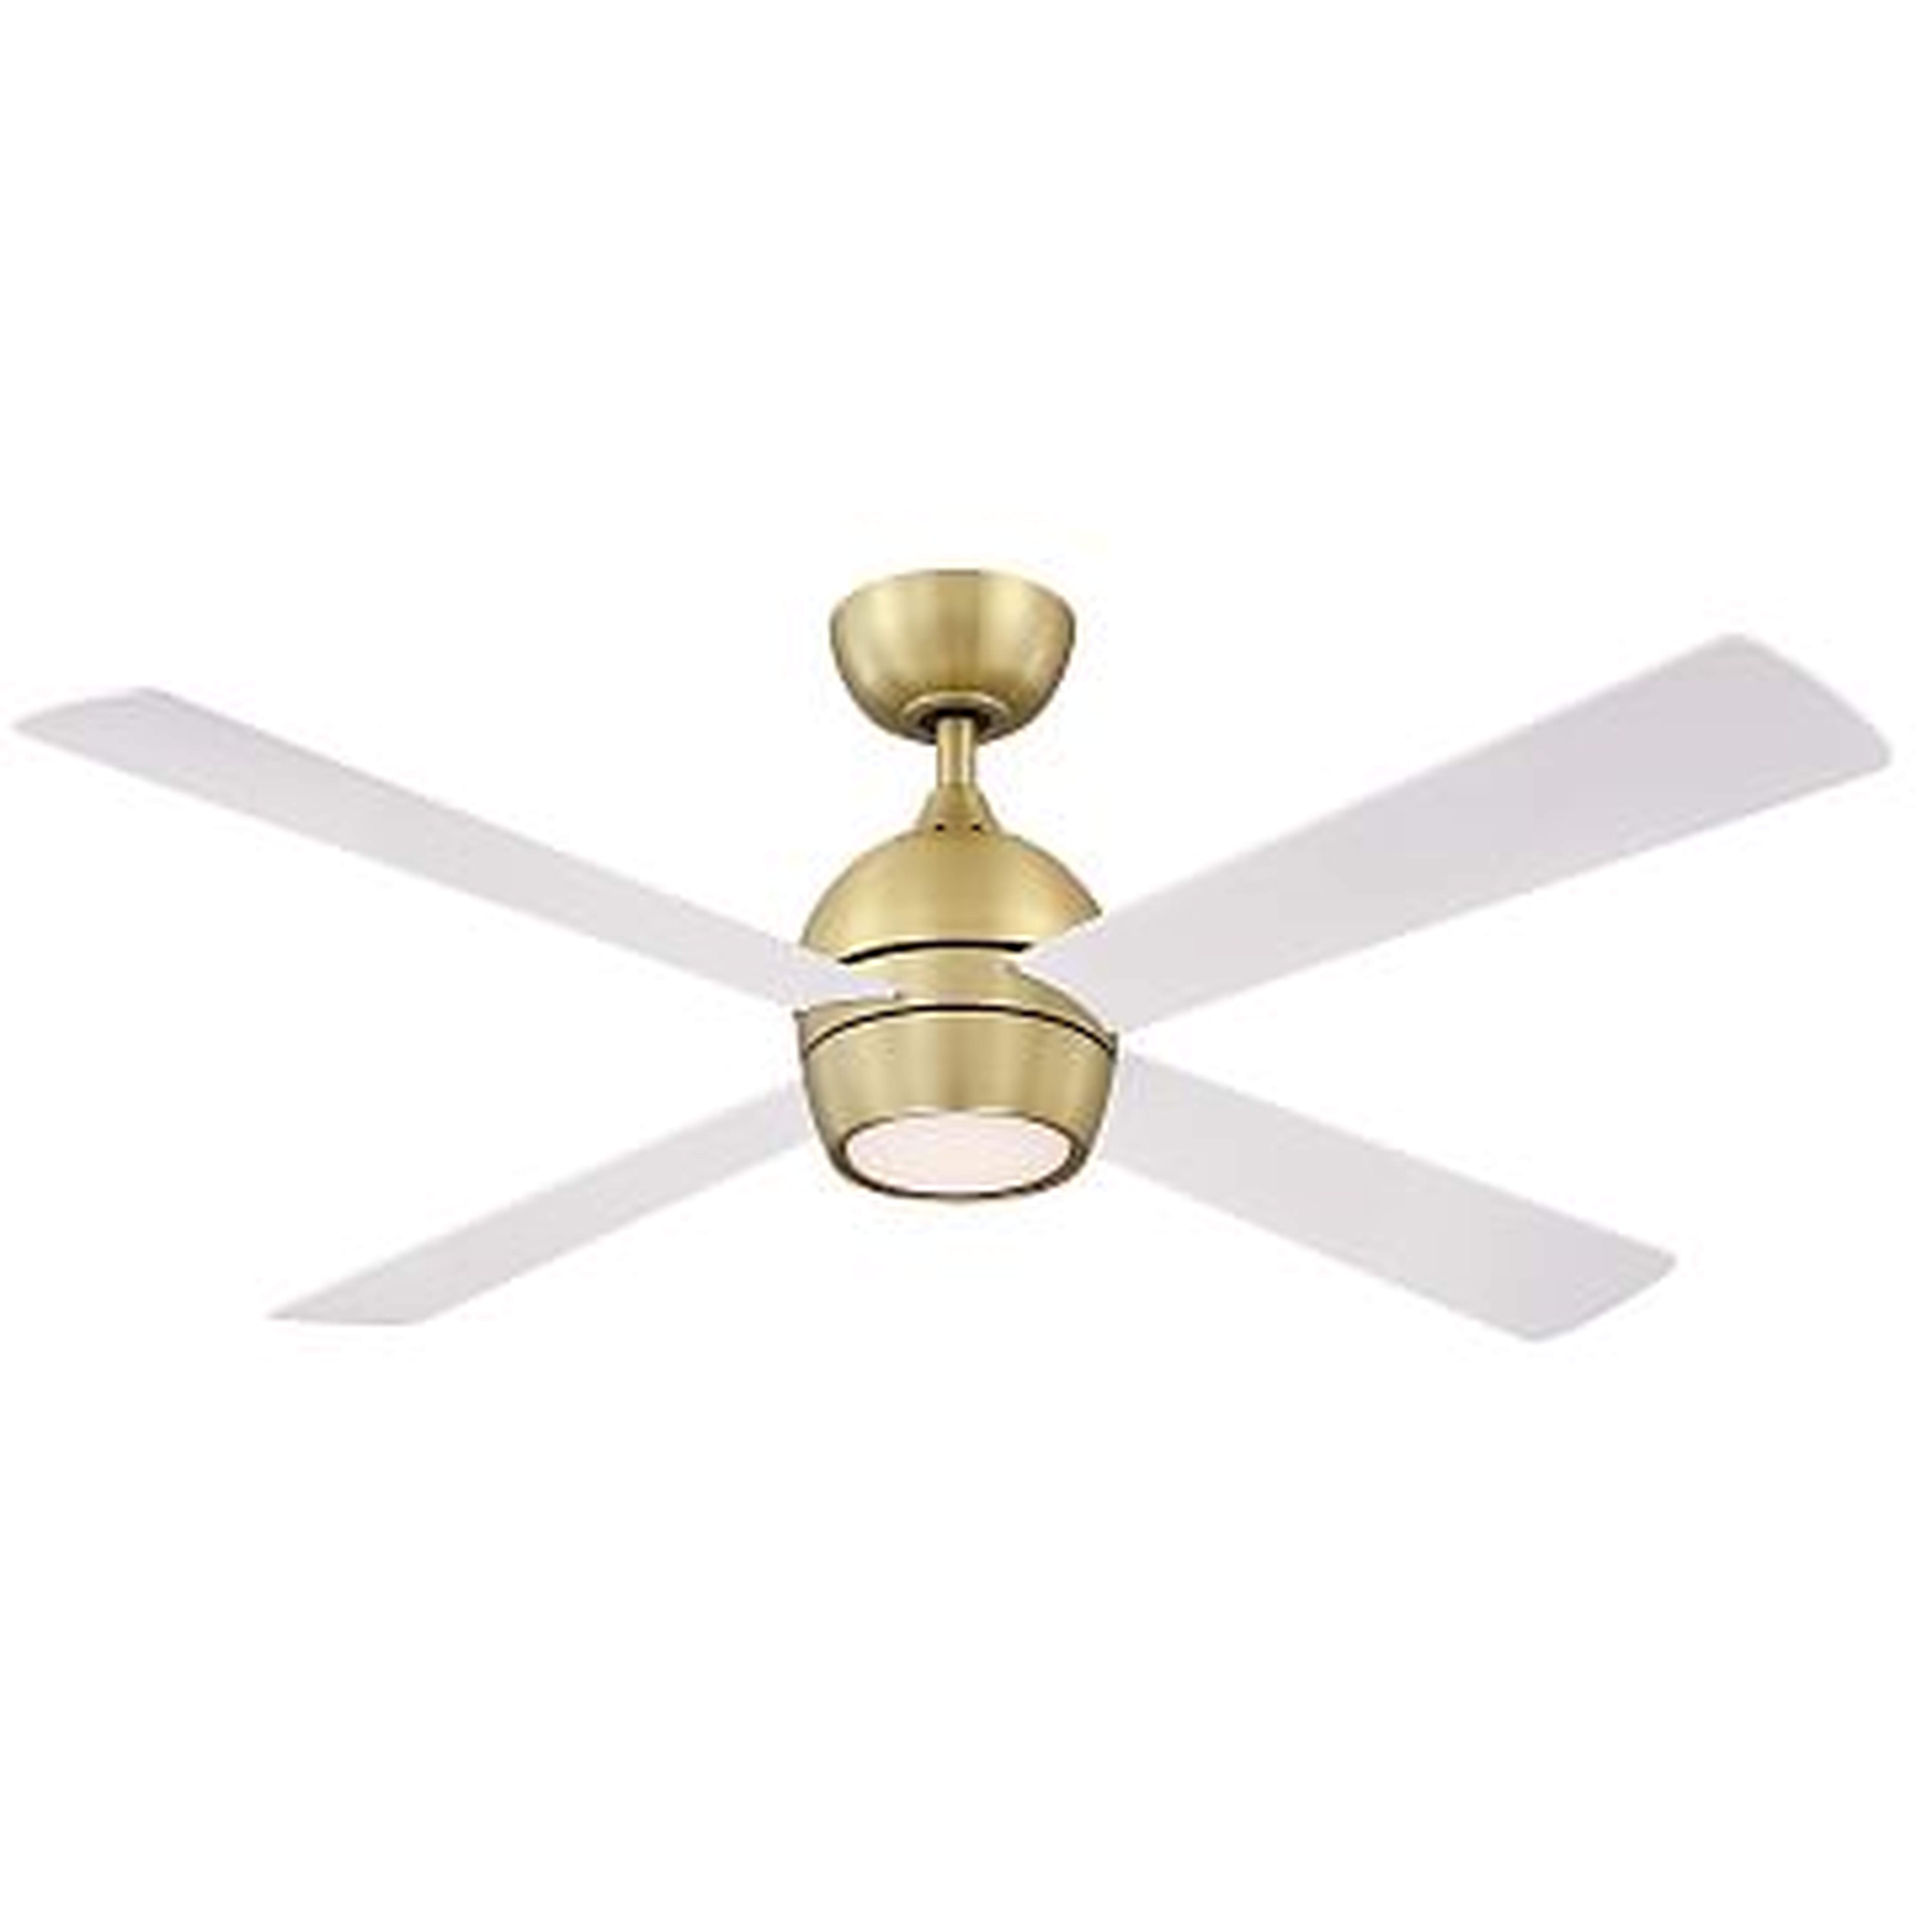 Kwad Ceiling Fan, Brushed Satin Brass with white blades, 52" - West Elm